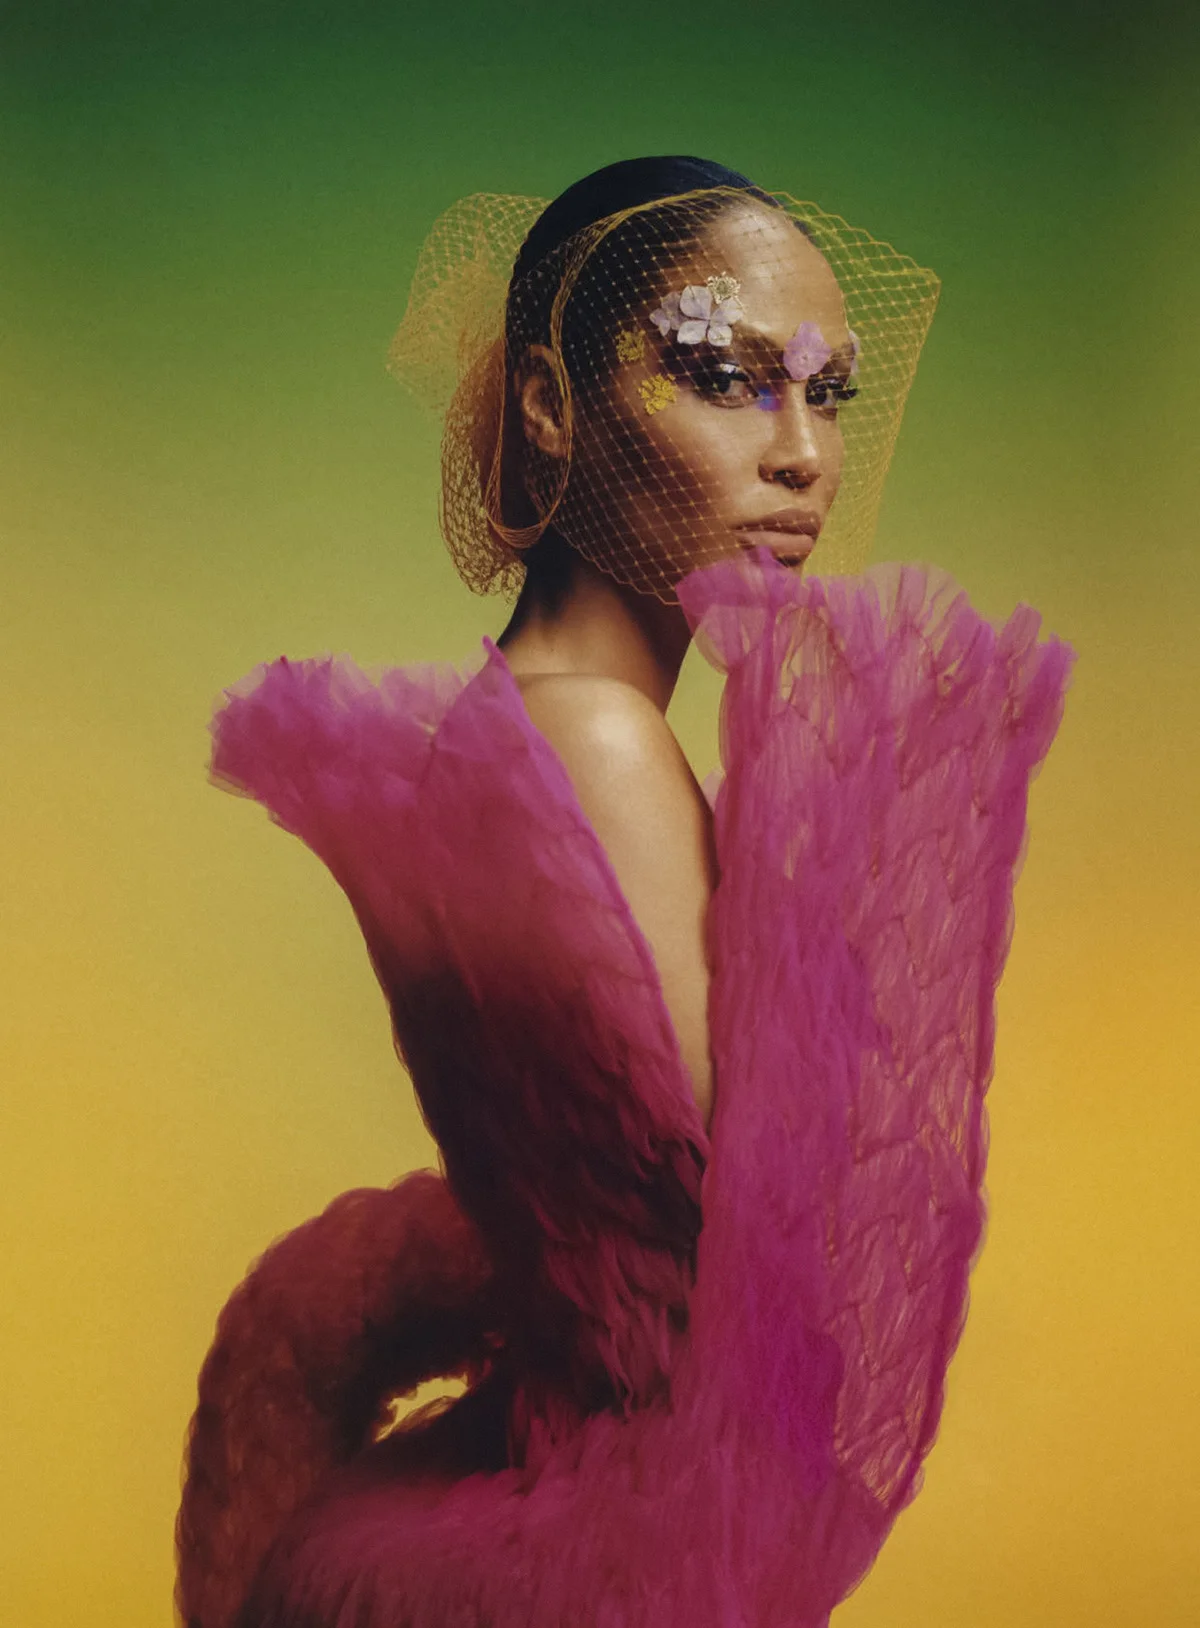 Joan Smalls covers Vogue Italia May 2022 by Cho Giseok